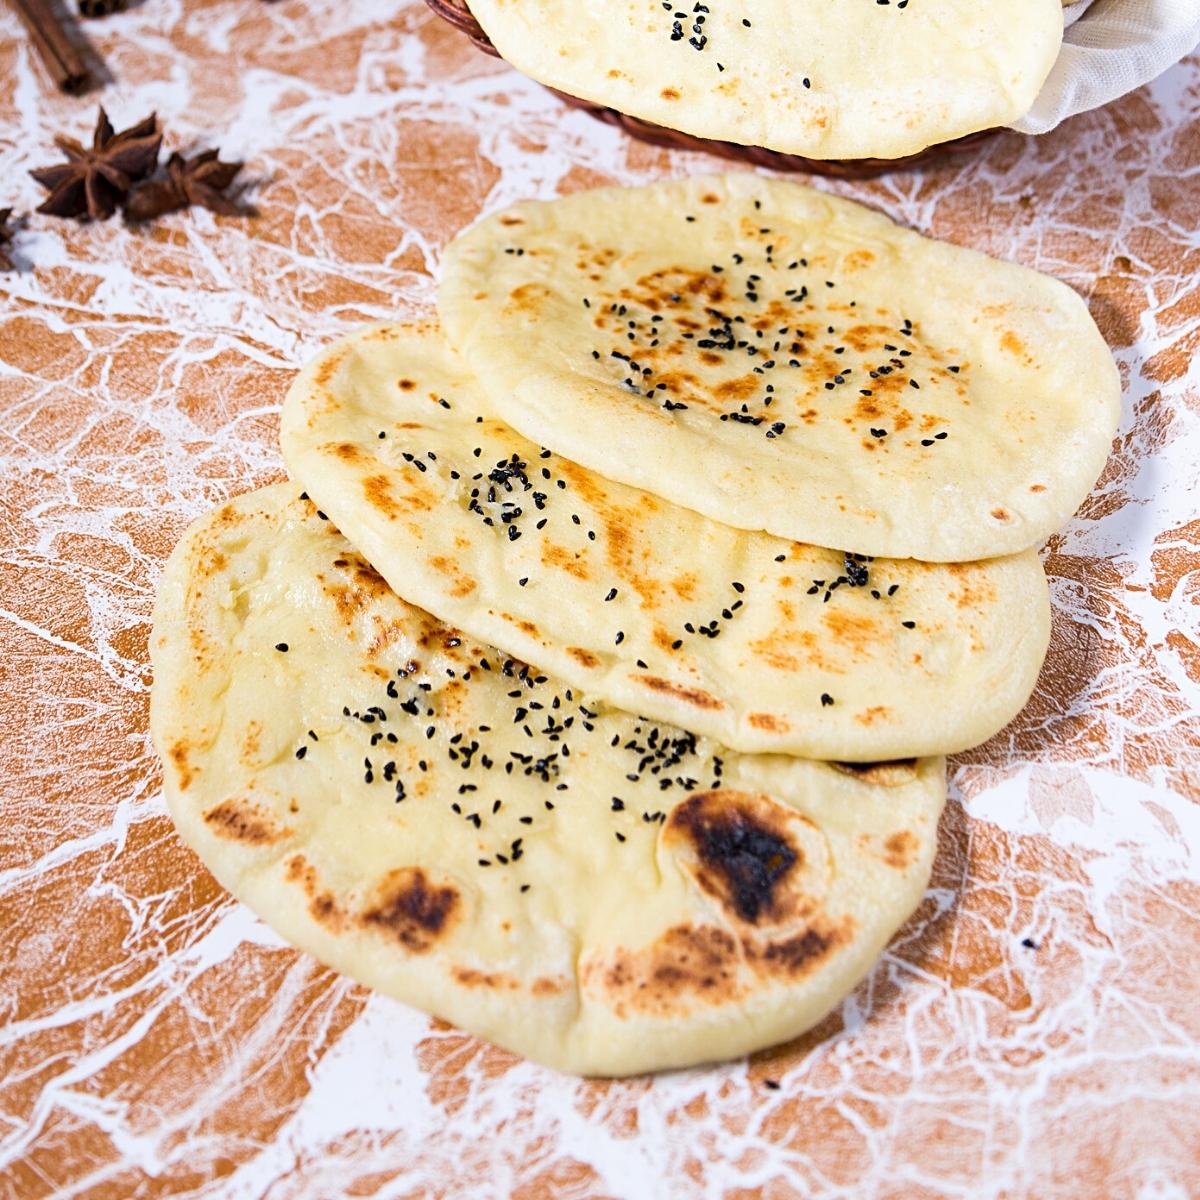 A stack of naan on the table.